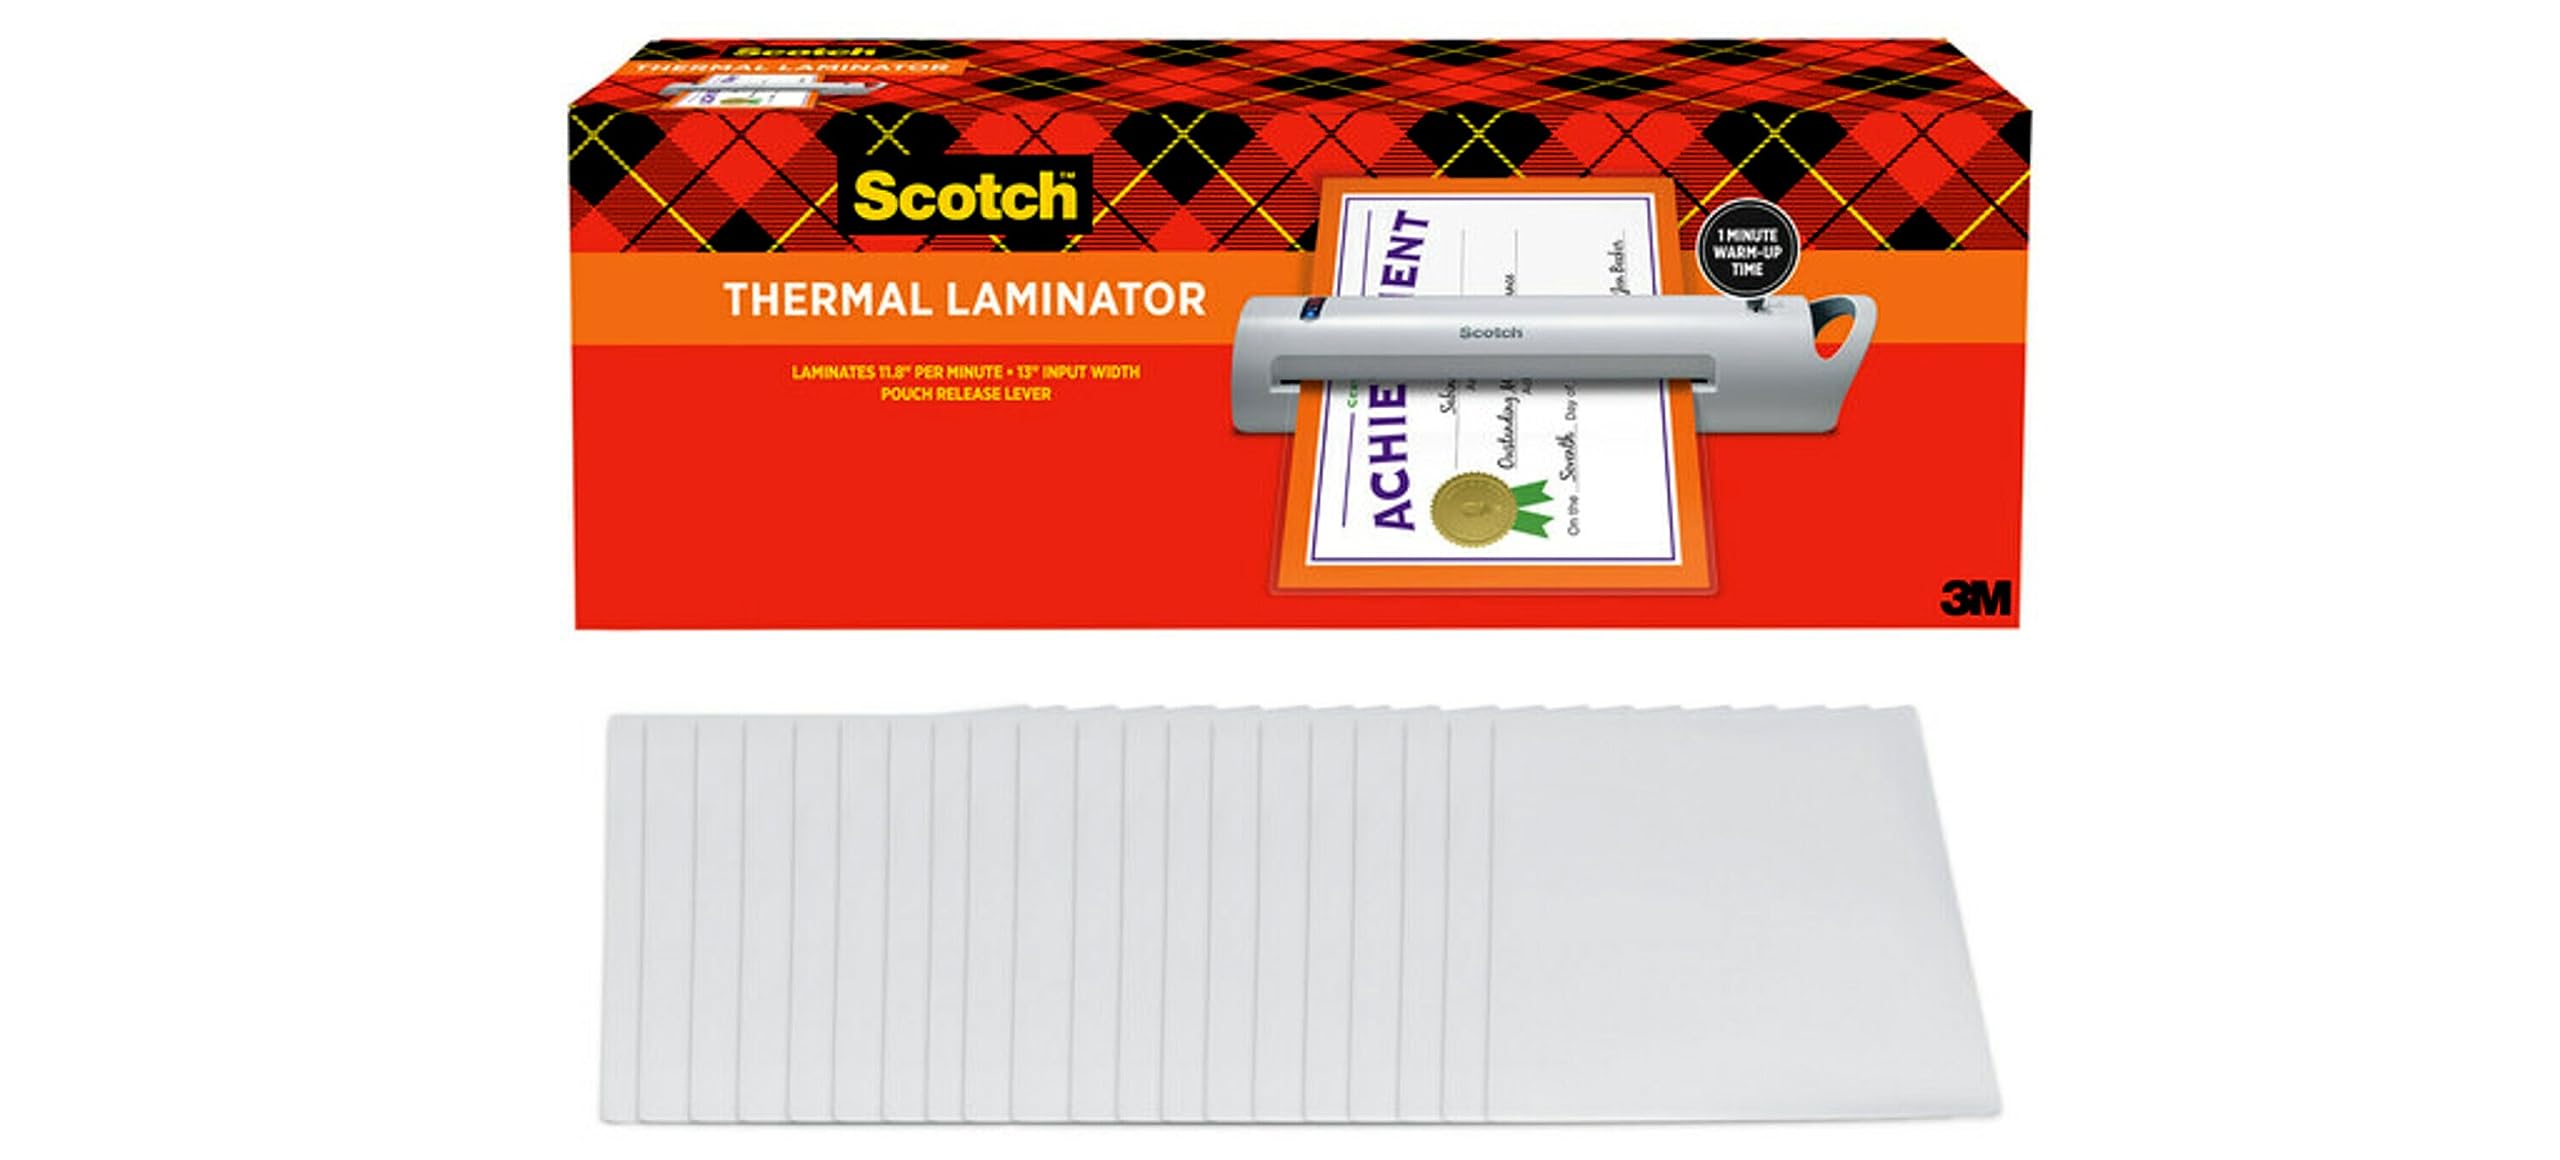 Scotch Thermal Laminator with 20 Letter Size Pouches, Extra Wide 13 Inch Input, Ideal for Teachers, Small Offices, or Home (TL1302XVP),White